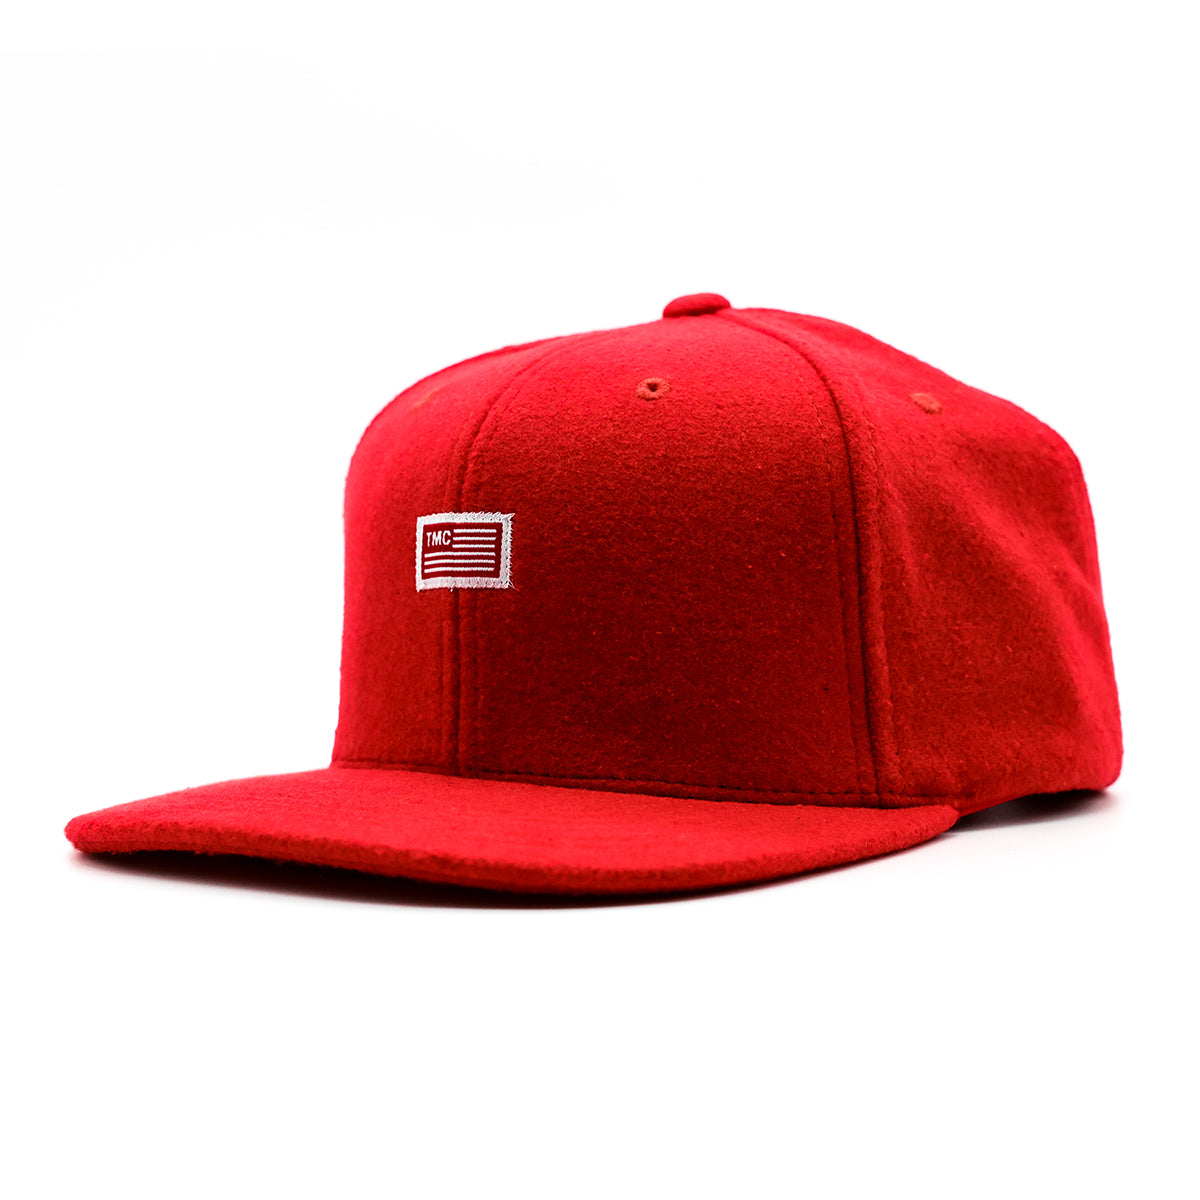 TMC Flag Limited Edition Snapback - Red - Angle